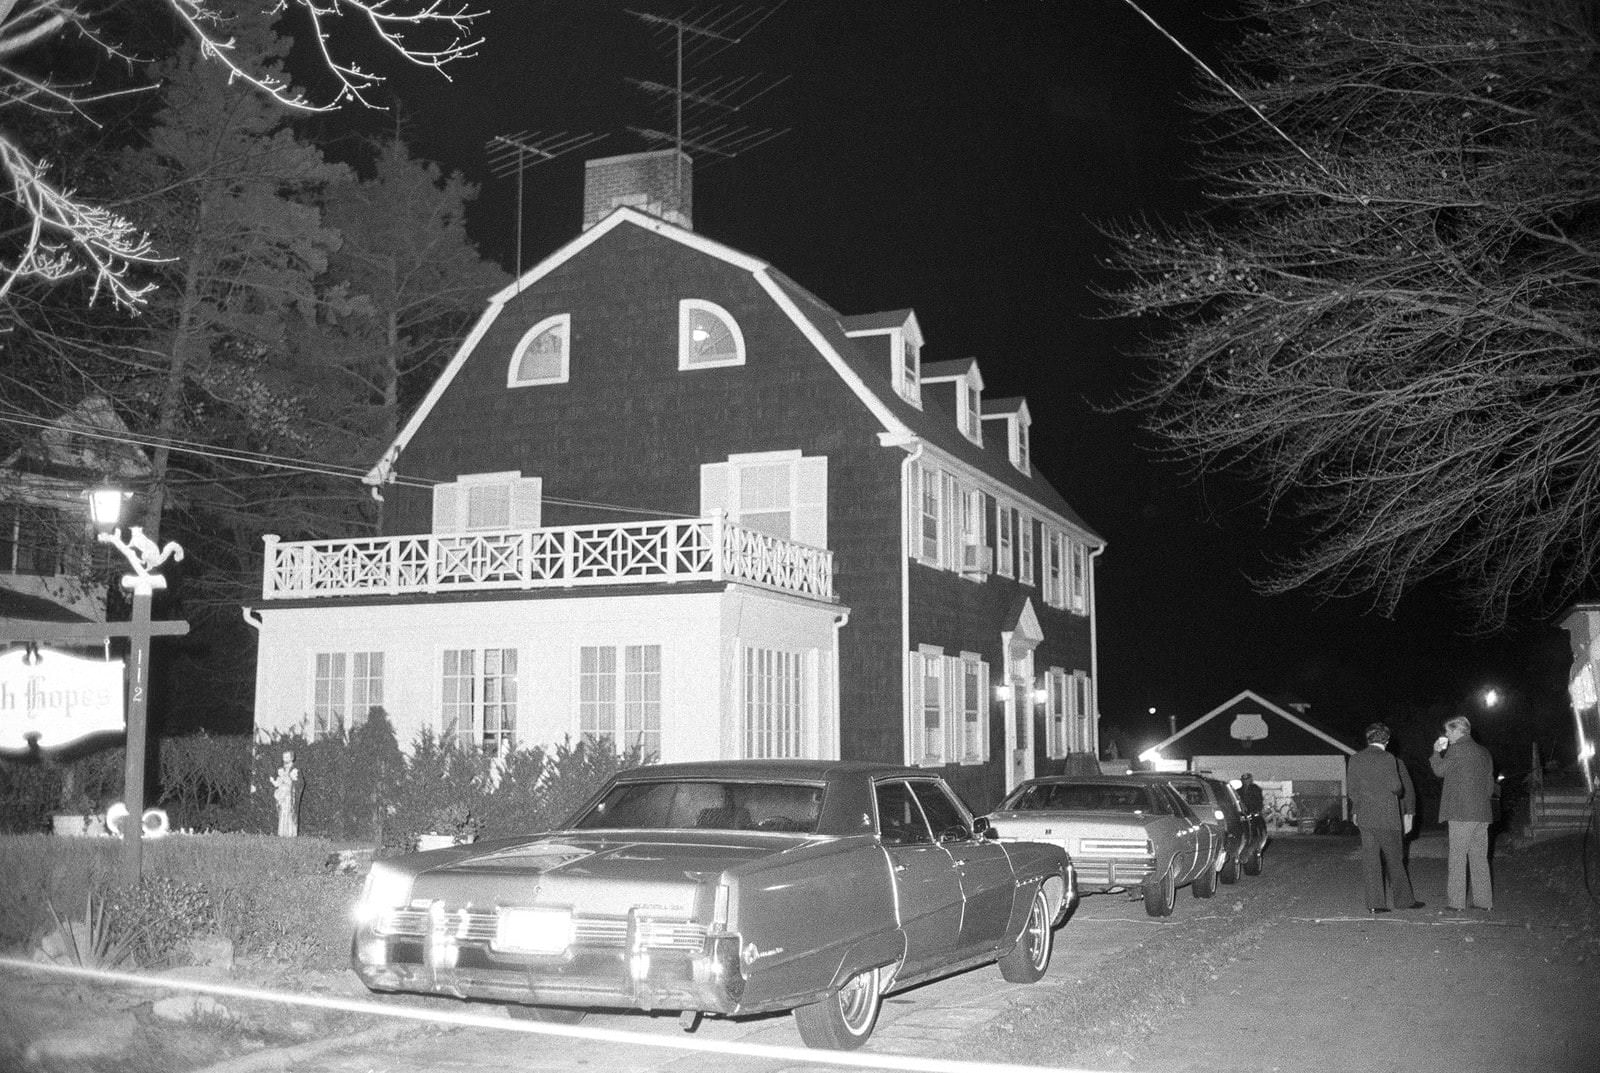 The crime scene on the night of Nov. 11, 1974, that inspired The Amityville Horror